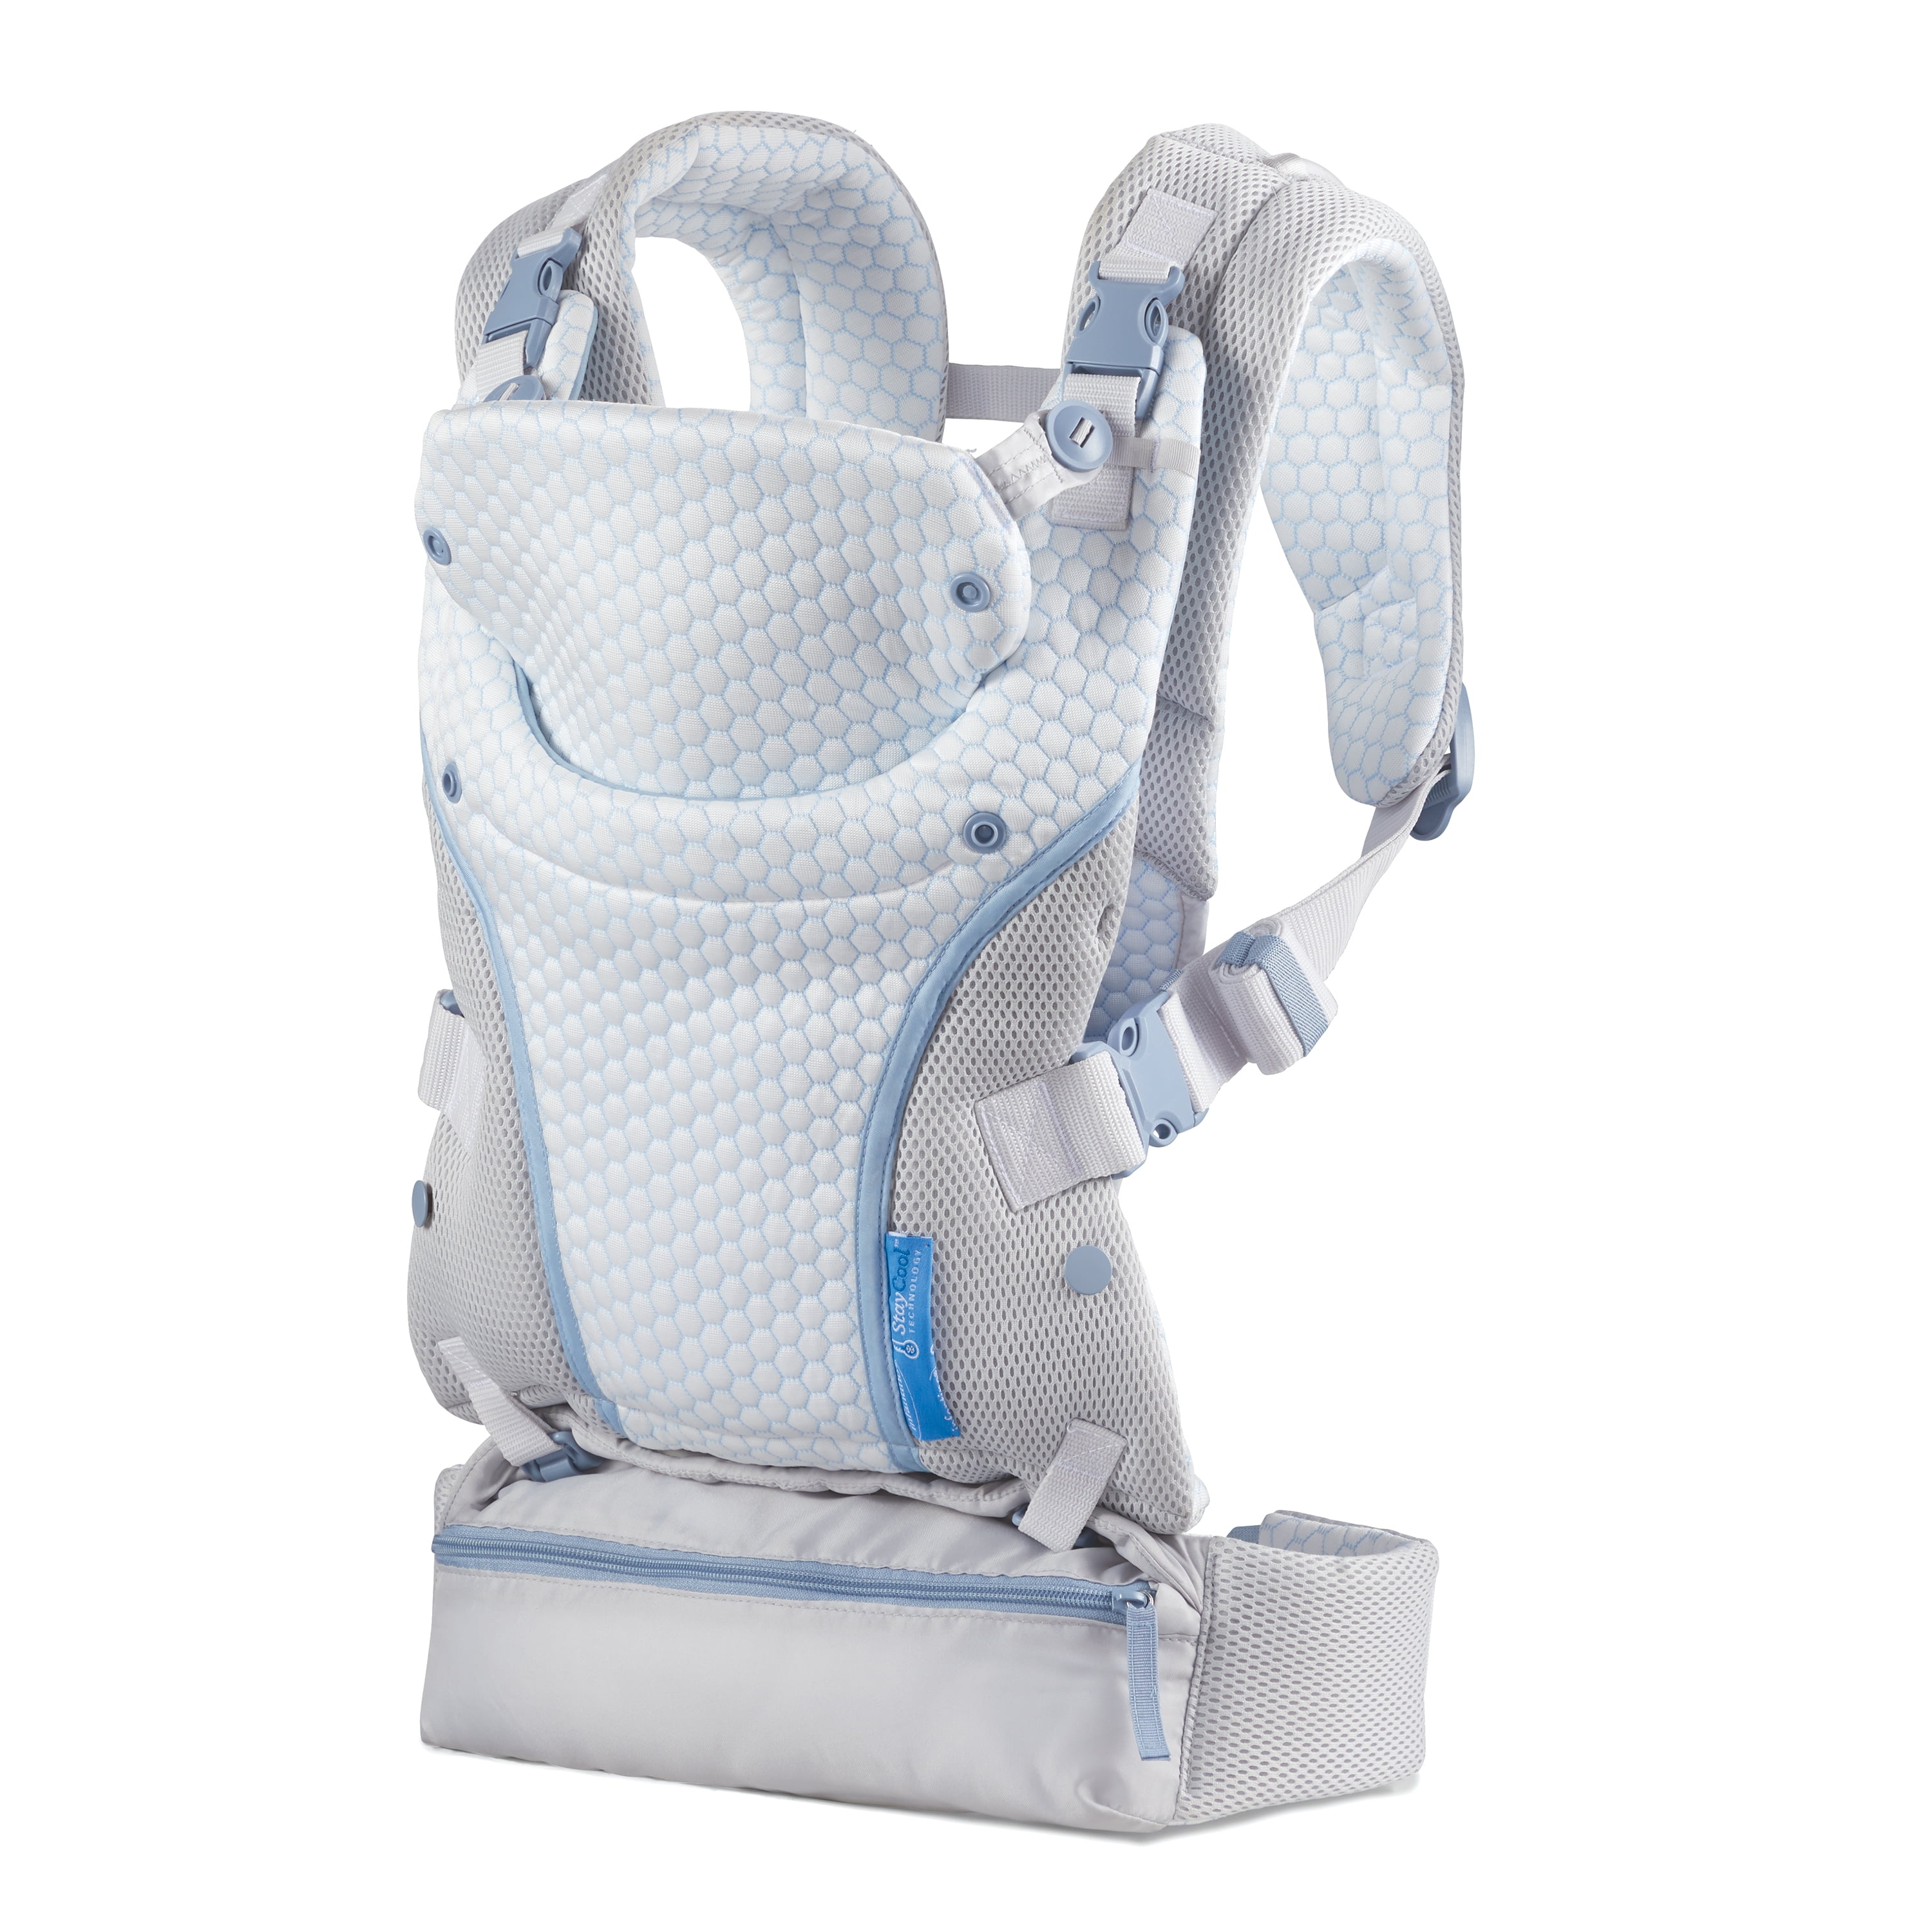 Infant Toddler Carrier for Shopping Hiking Traveling Grey 4 in 1 Convertible Carrier with Adjustable Straps Waist Belt and Breathable Mesh BABY JOY Baby Carrier